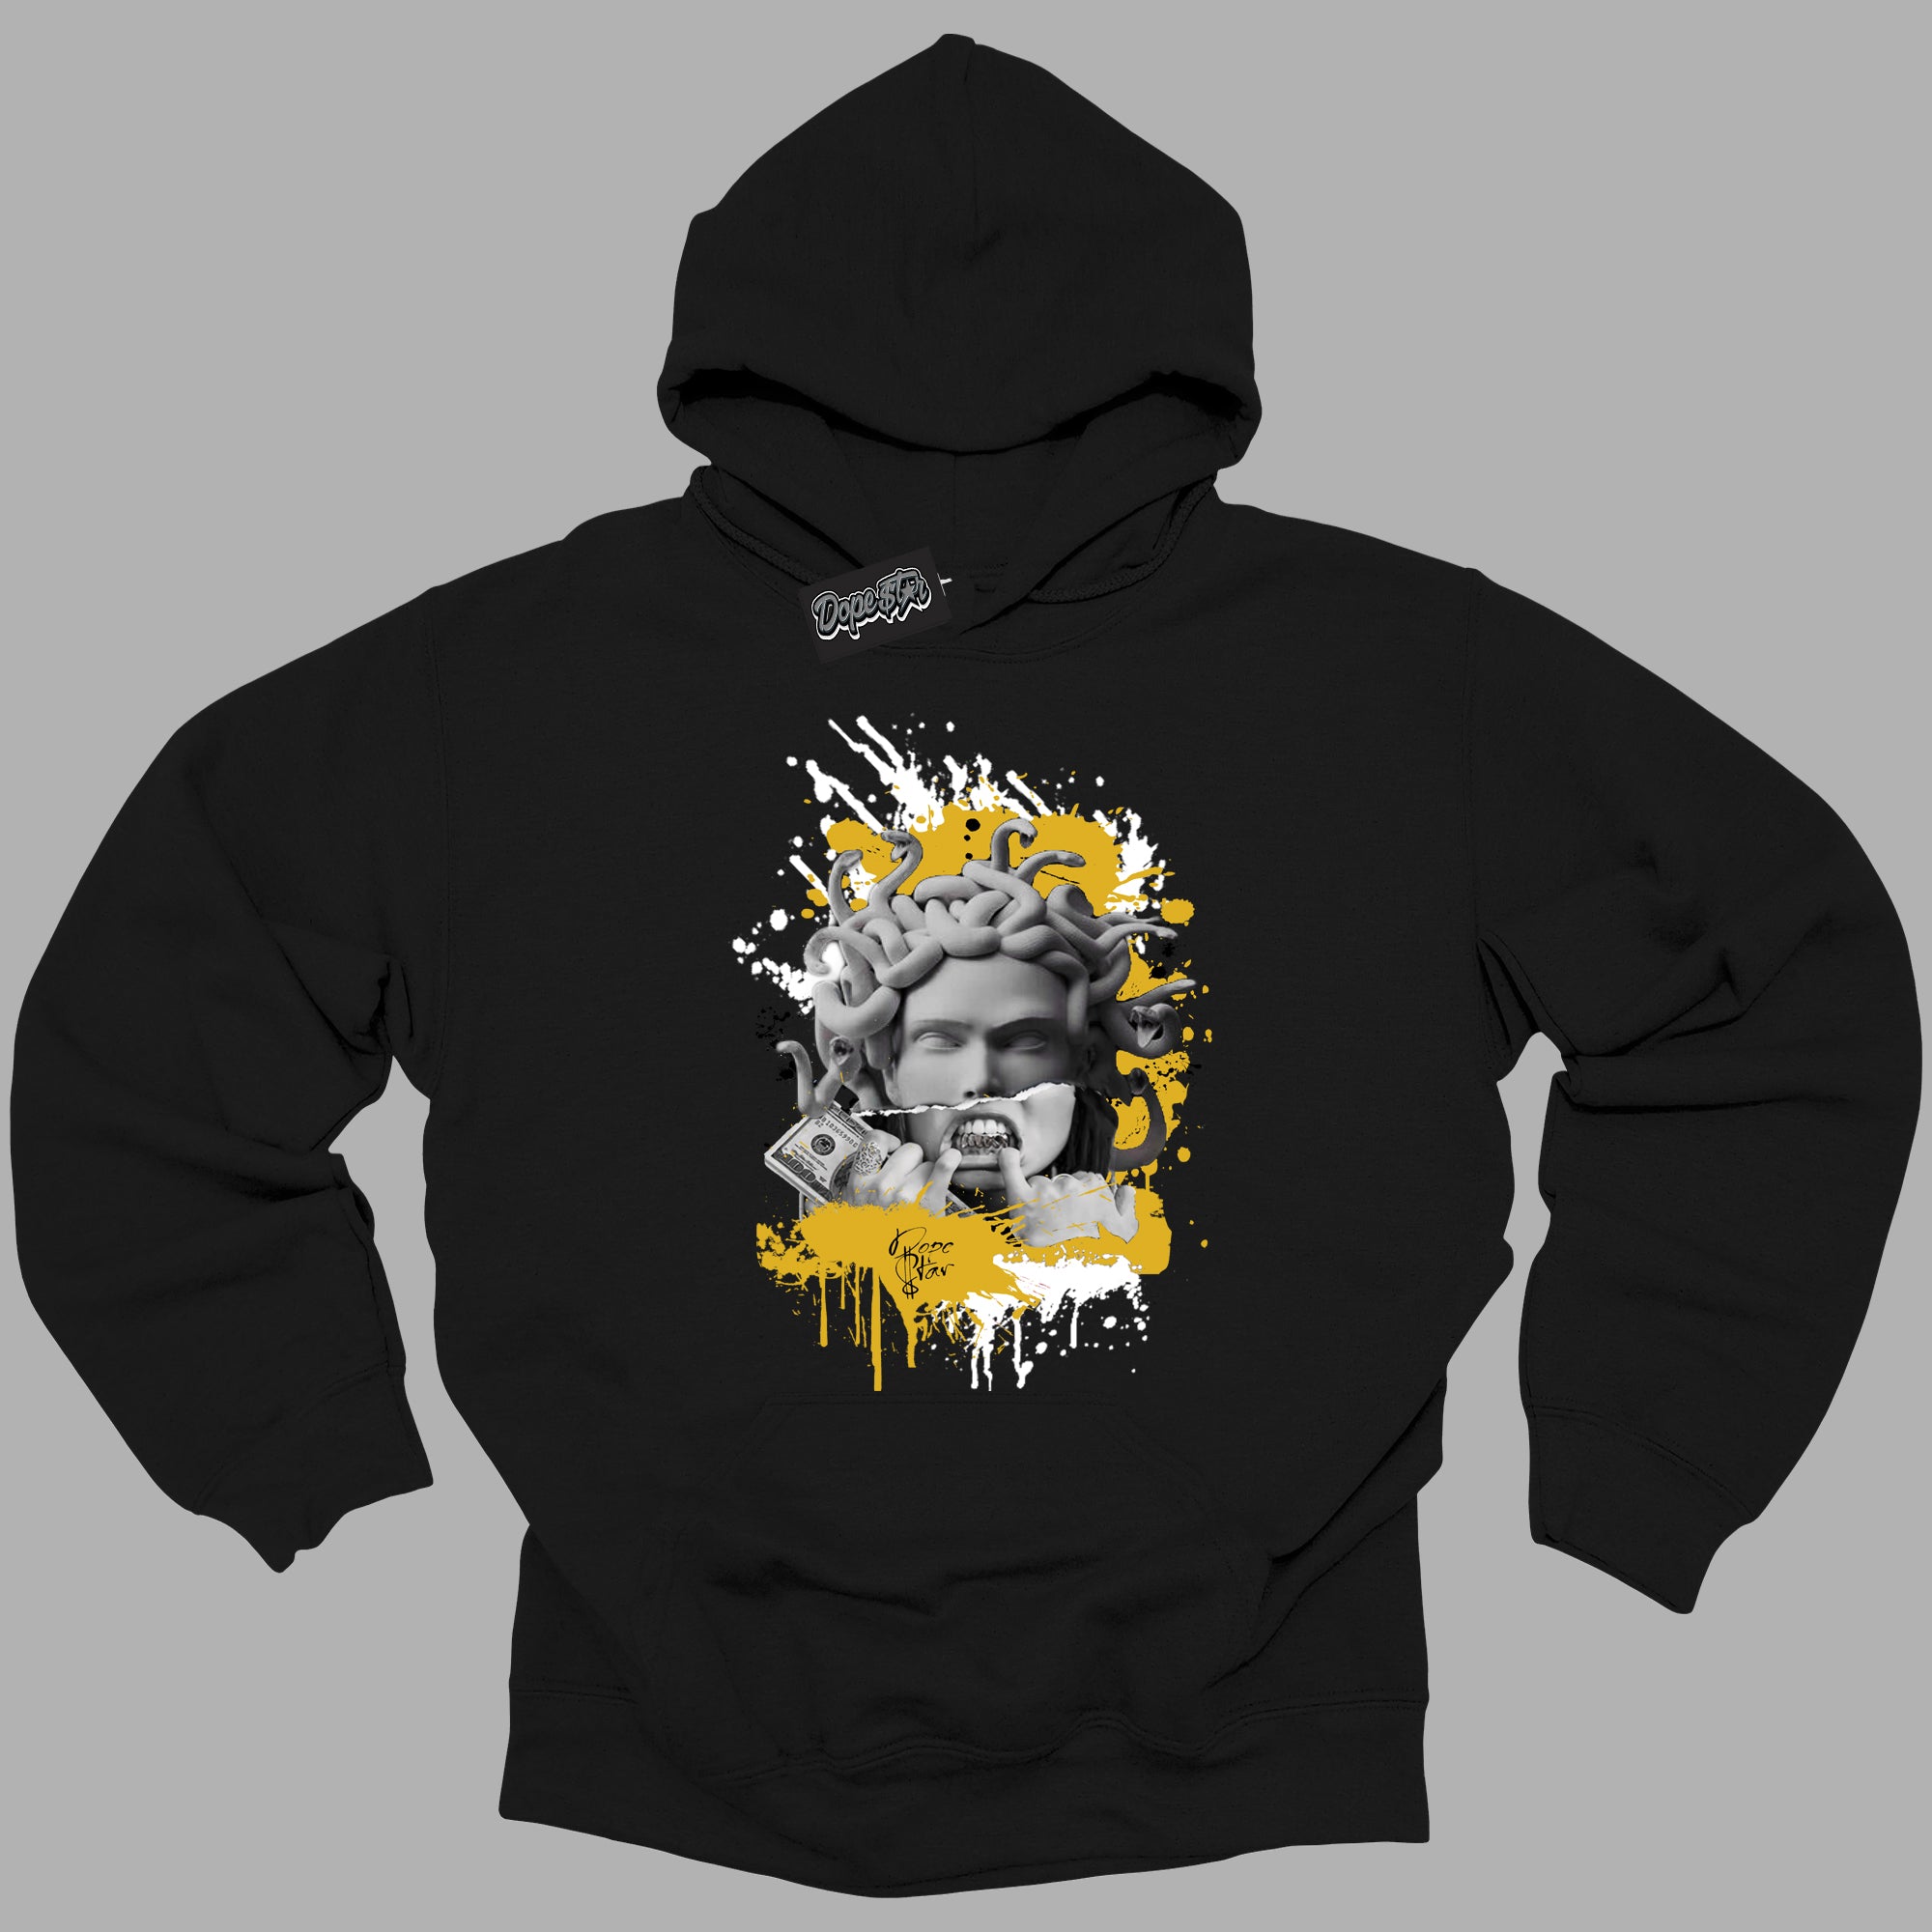 Cool Black Hoodie with “ Medusa ”  design that Perfectly Matches Yellow Ochre 6s Sneakers.